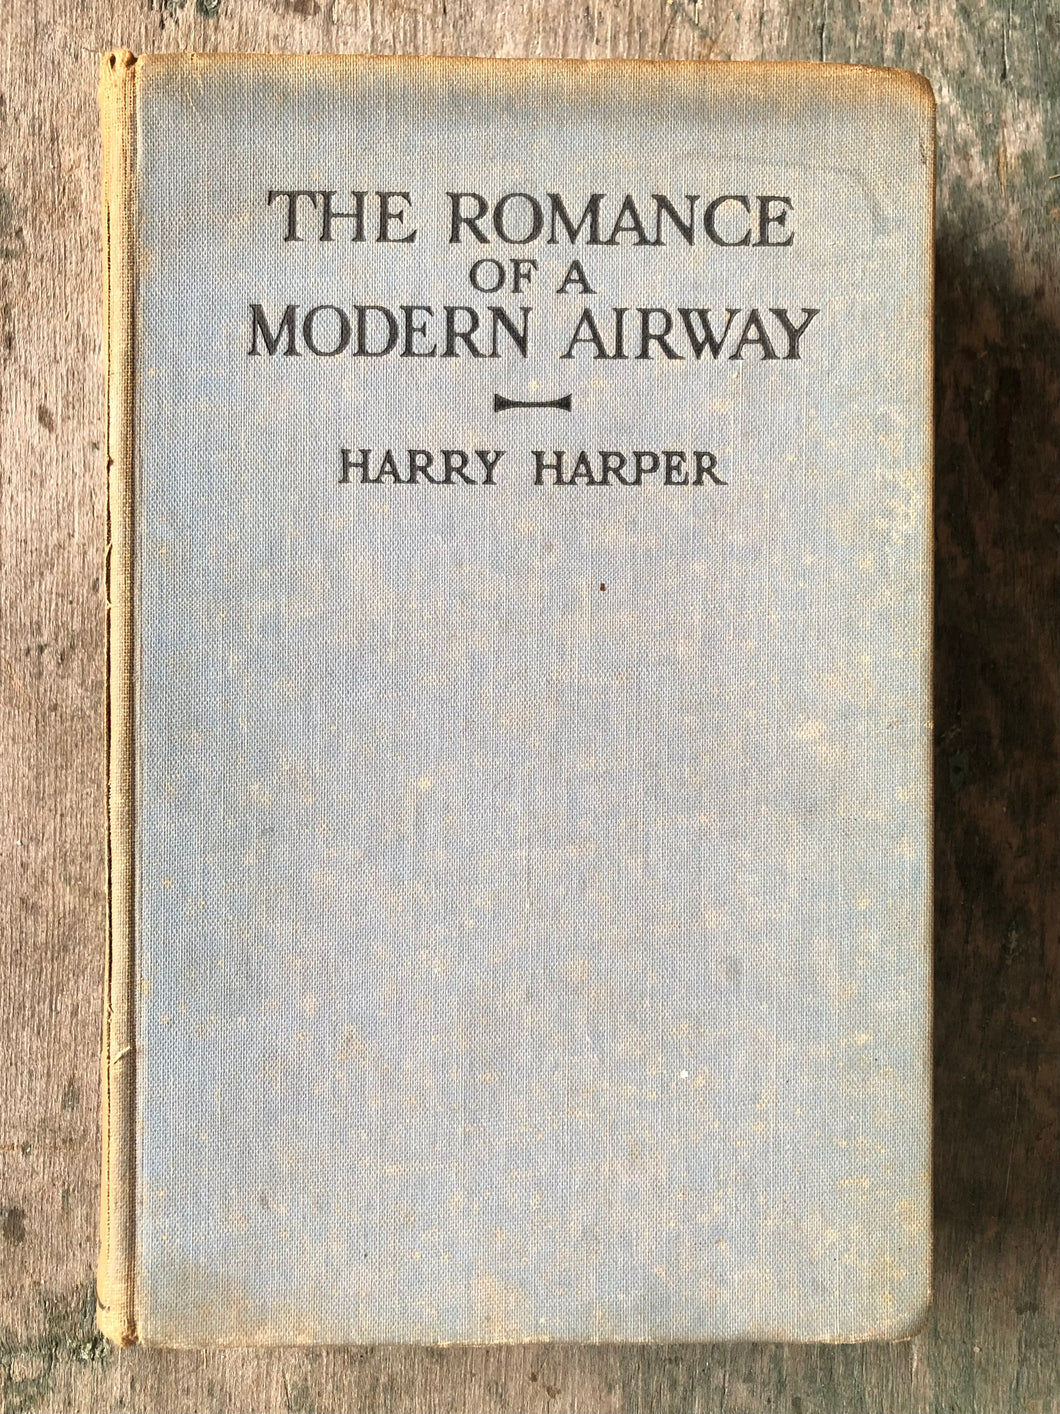 The Romance of a Modern Airway by Harry Harper